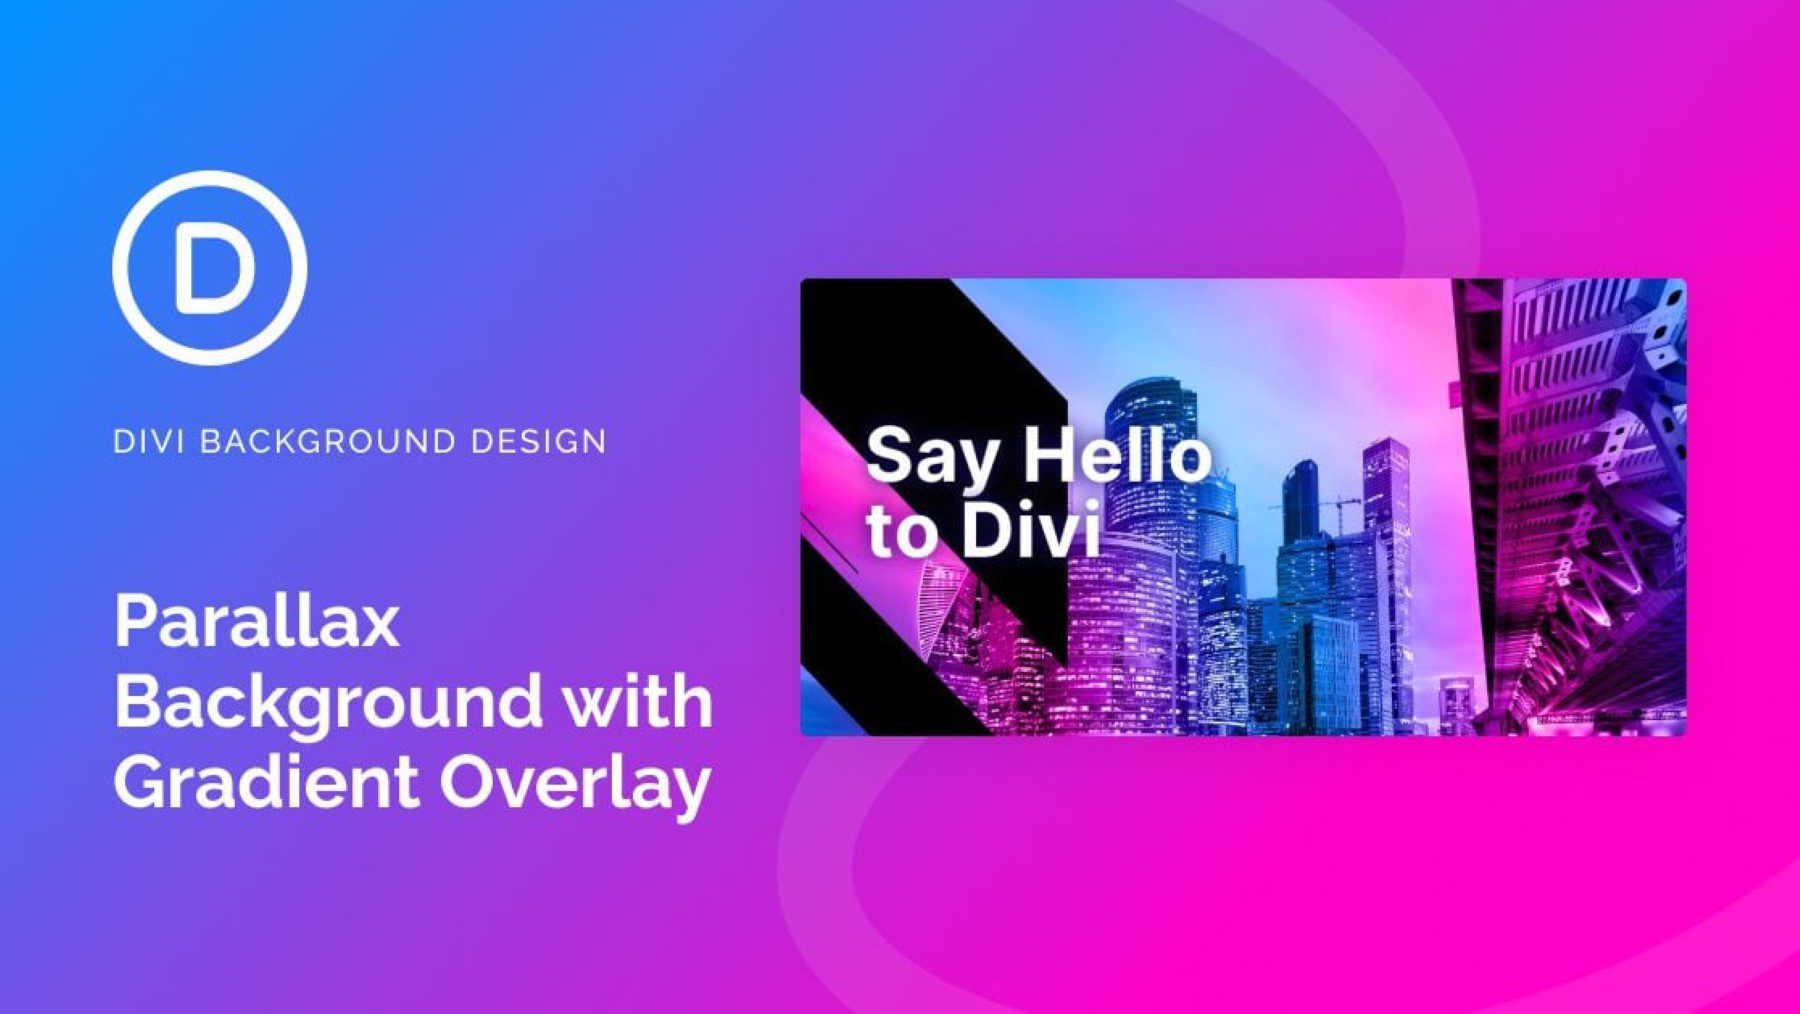 Create a parallax background with gradient overlay